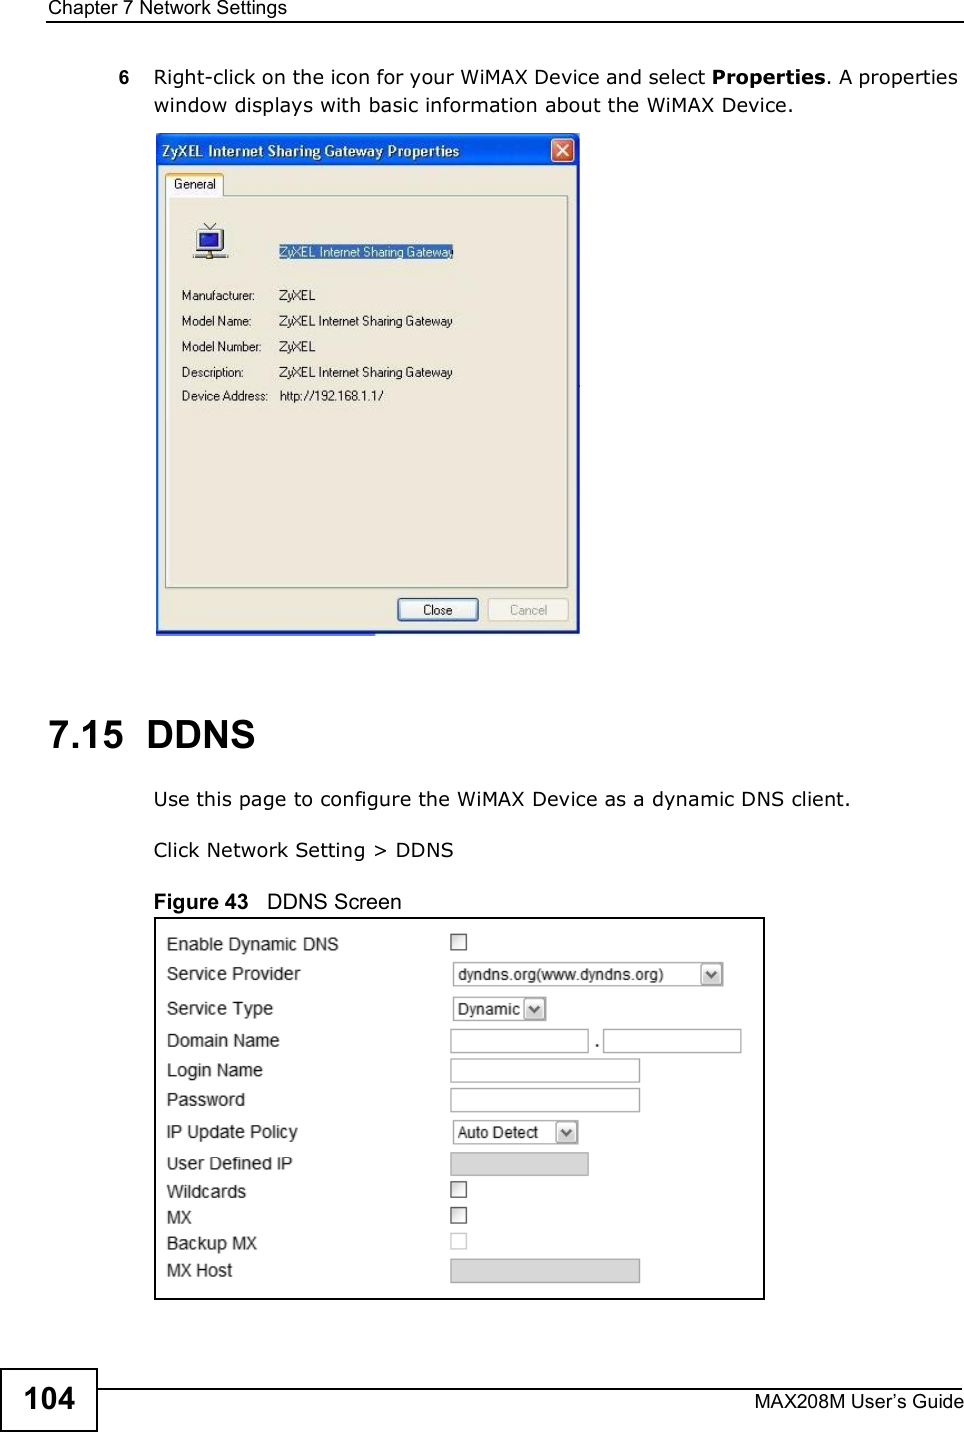 Chapter 7Network SettingsMAX208M User s Guide1046Right-click on the icon for your WiMAX Device and select Properties. A properties window displays with basic information about the WiMAX Device. 7.15  DDNSUse this page to configure the WiMAX Device as a dynamic DNS client.Click Network Setting &gt; DDNSFigure 43   DDNS Screen